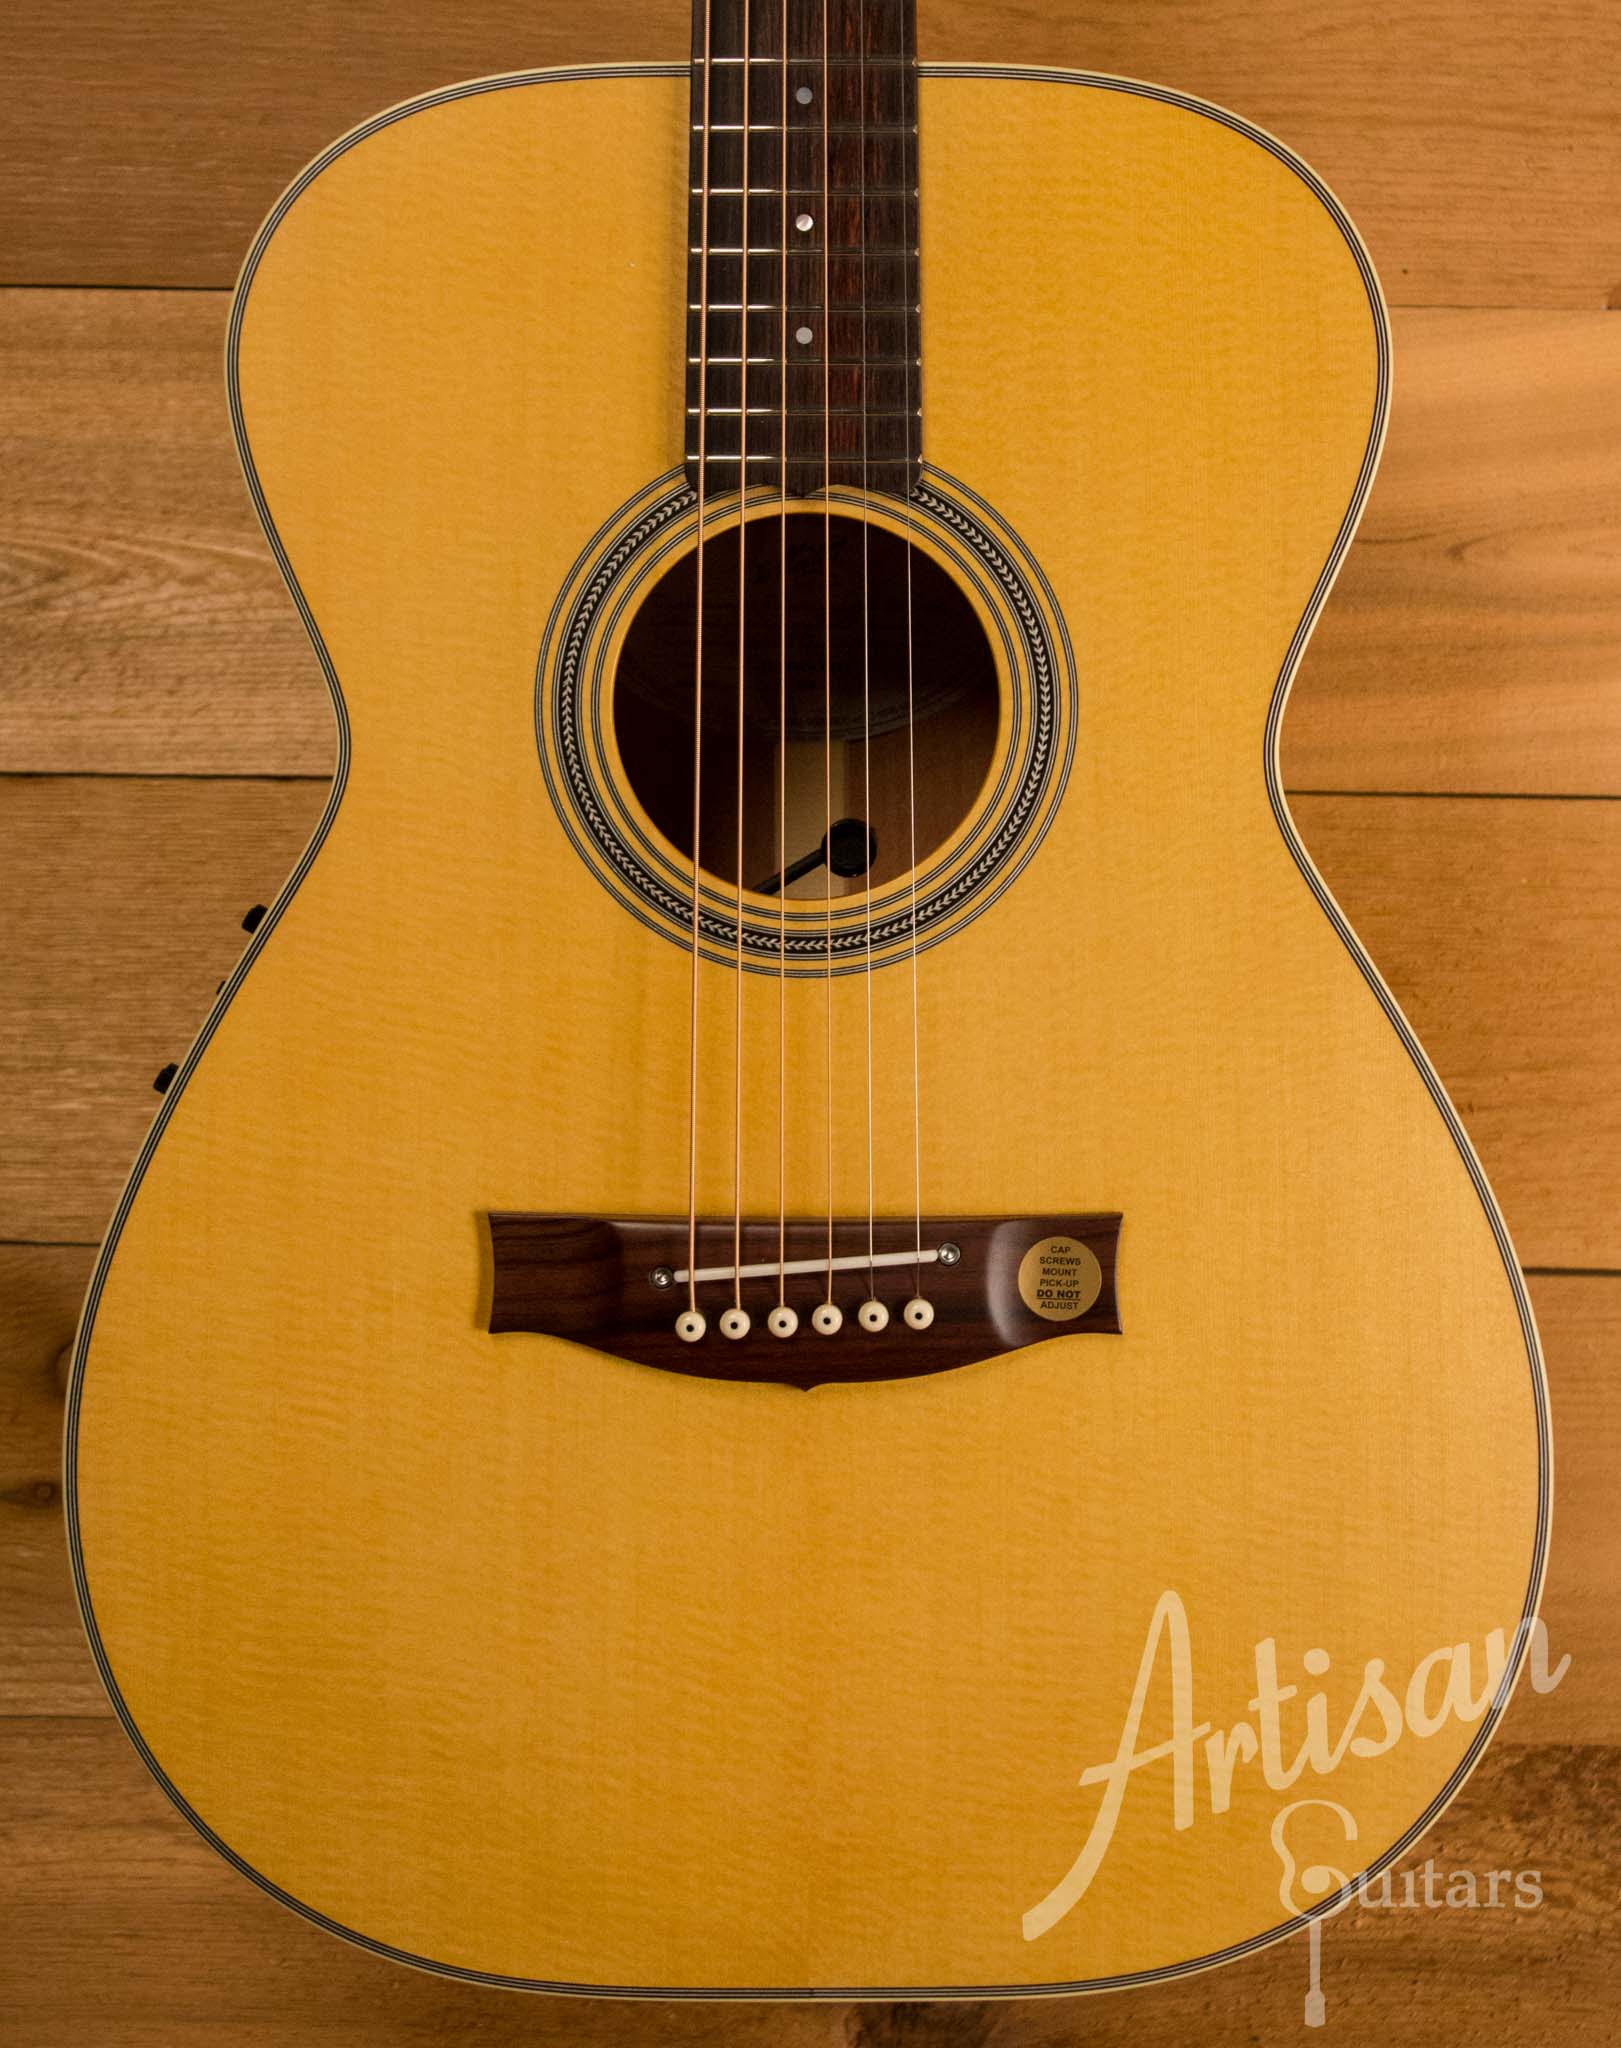 Maton T.E Personal Guitar Sitka Spruce and Queensland Maple ID-10696 - Artisan Guitars